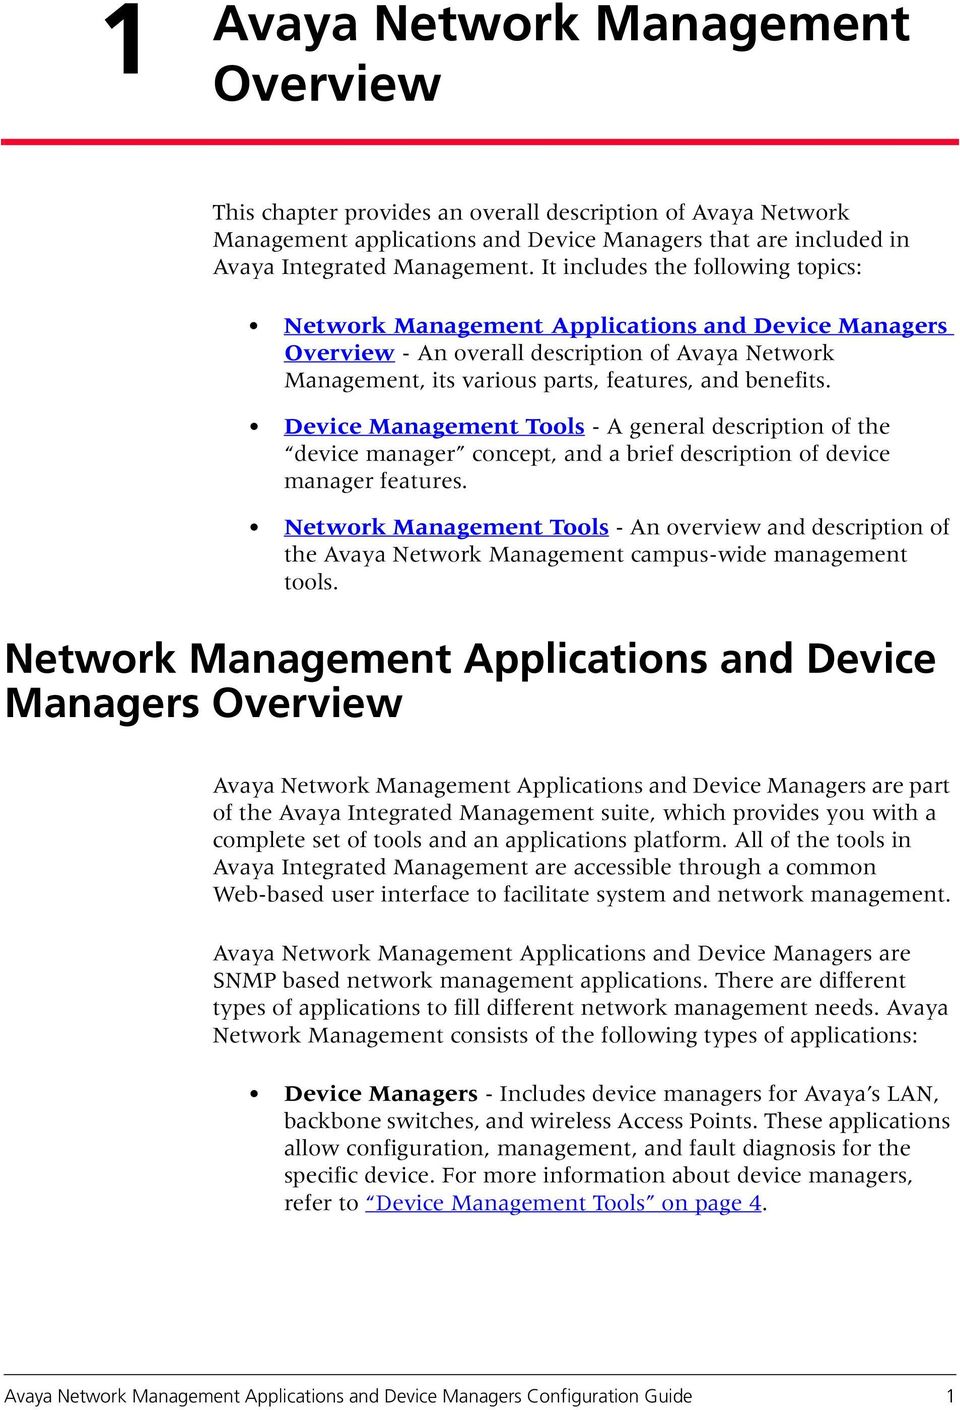 Device Management Tools - A general description of the device manager concept, and a brief description of device manager features.